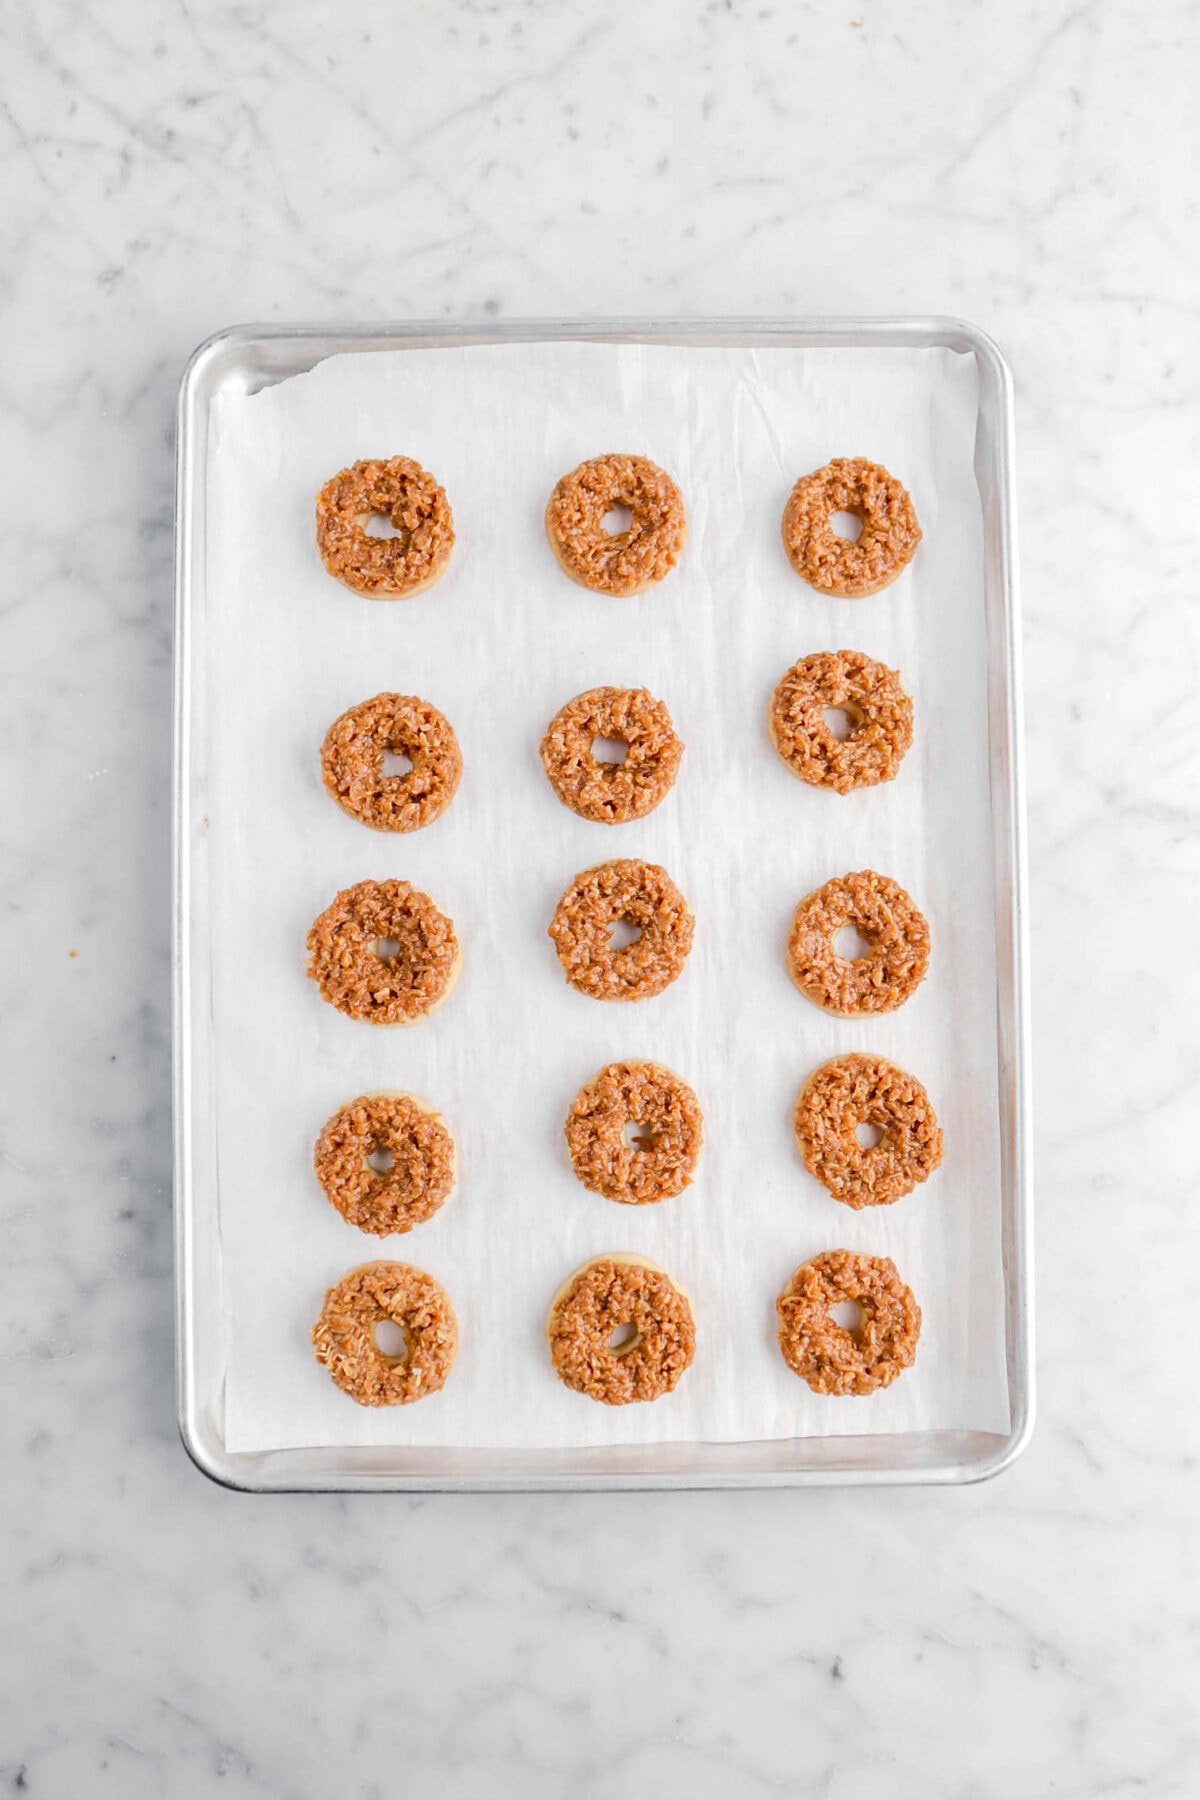 coconut caramel on shortbread cookies on lined sheet pan.